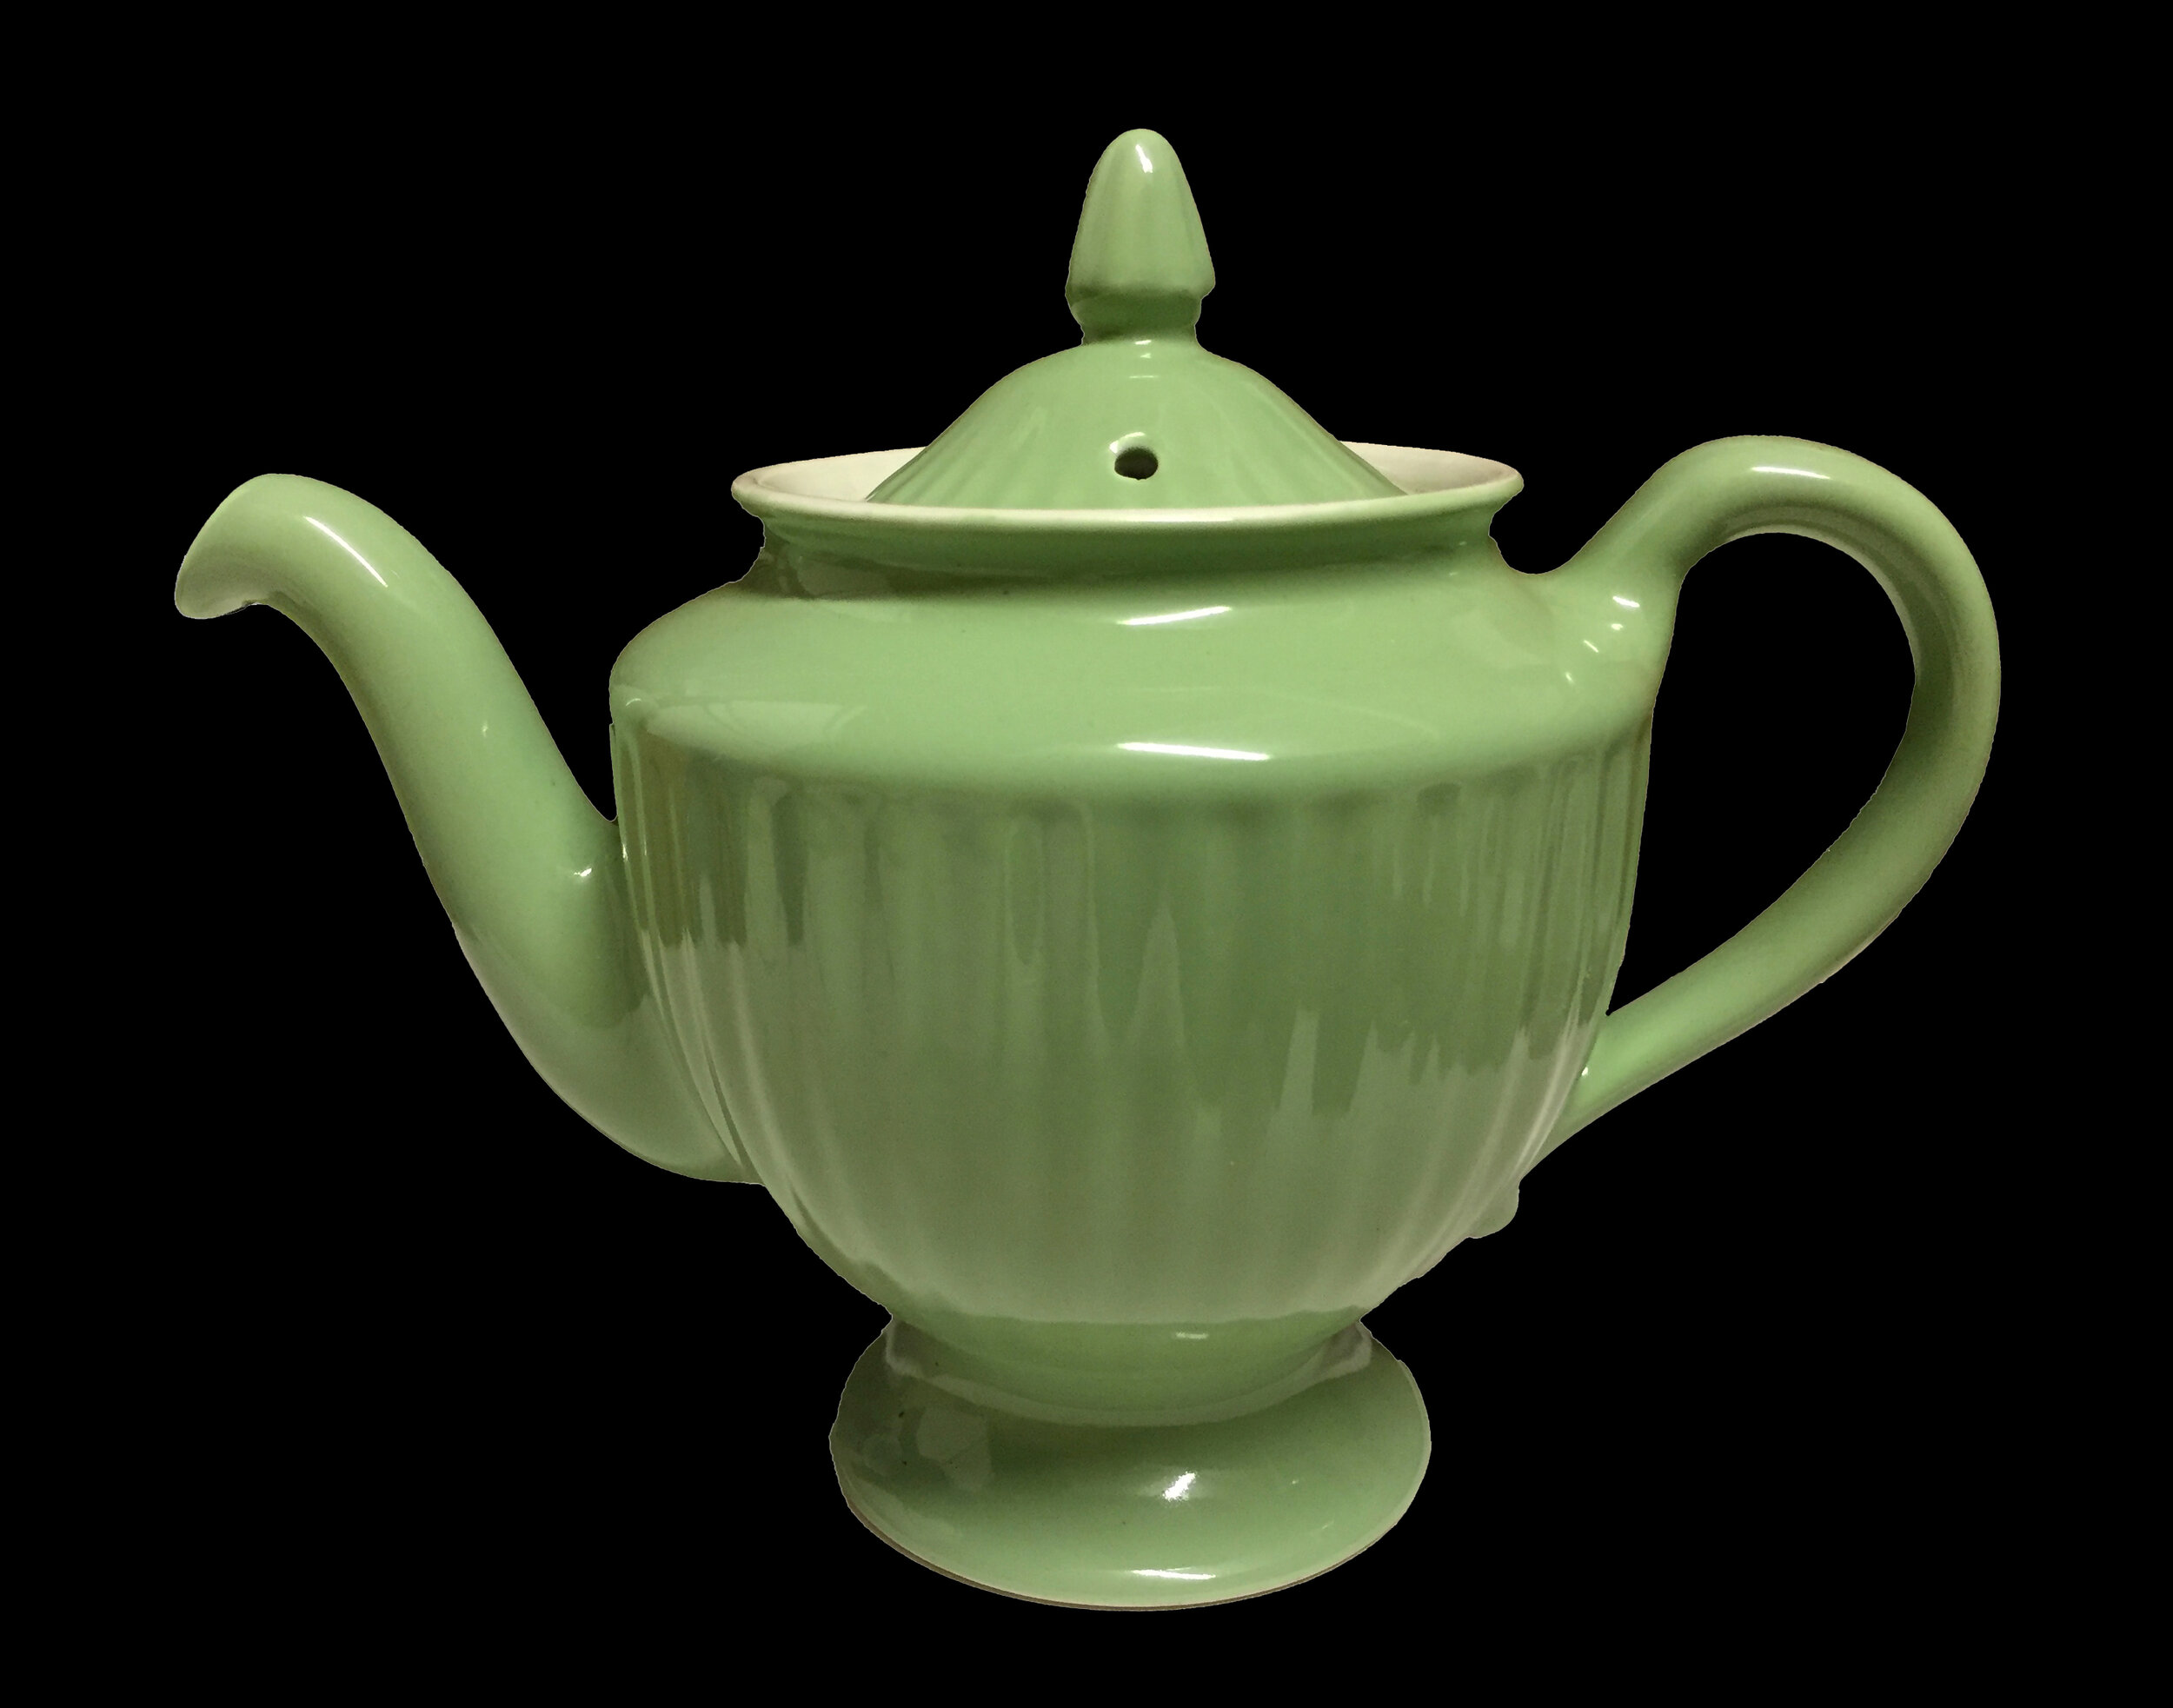 Dating Marlin 39a - Dating Hall Teapots